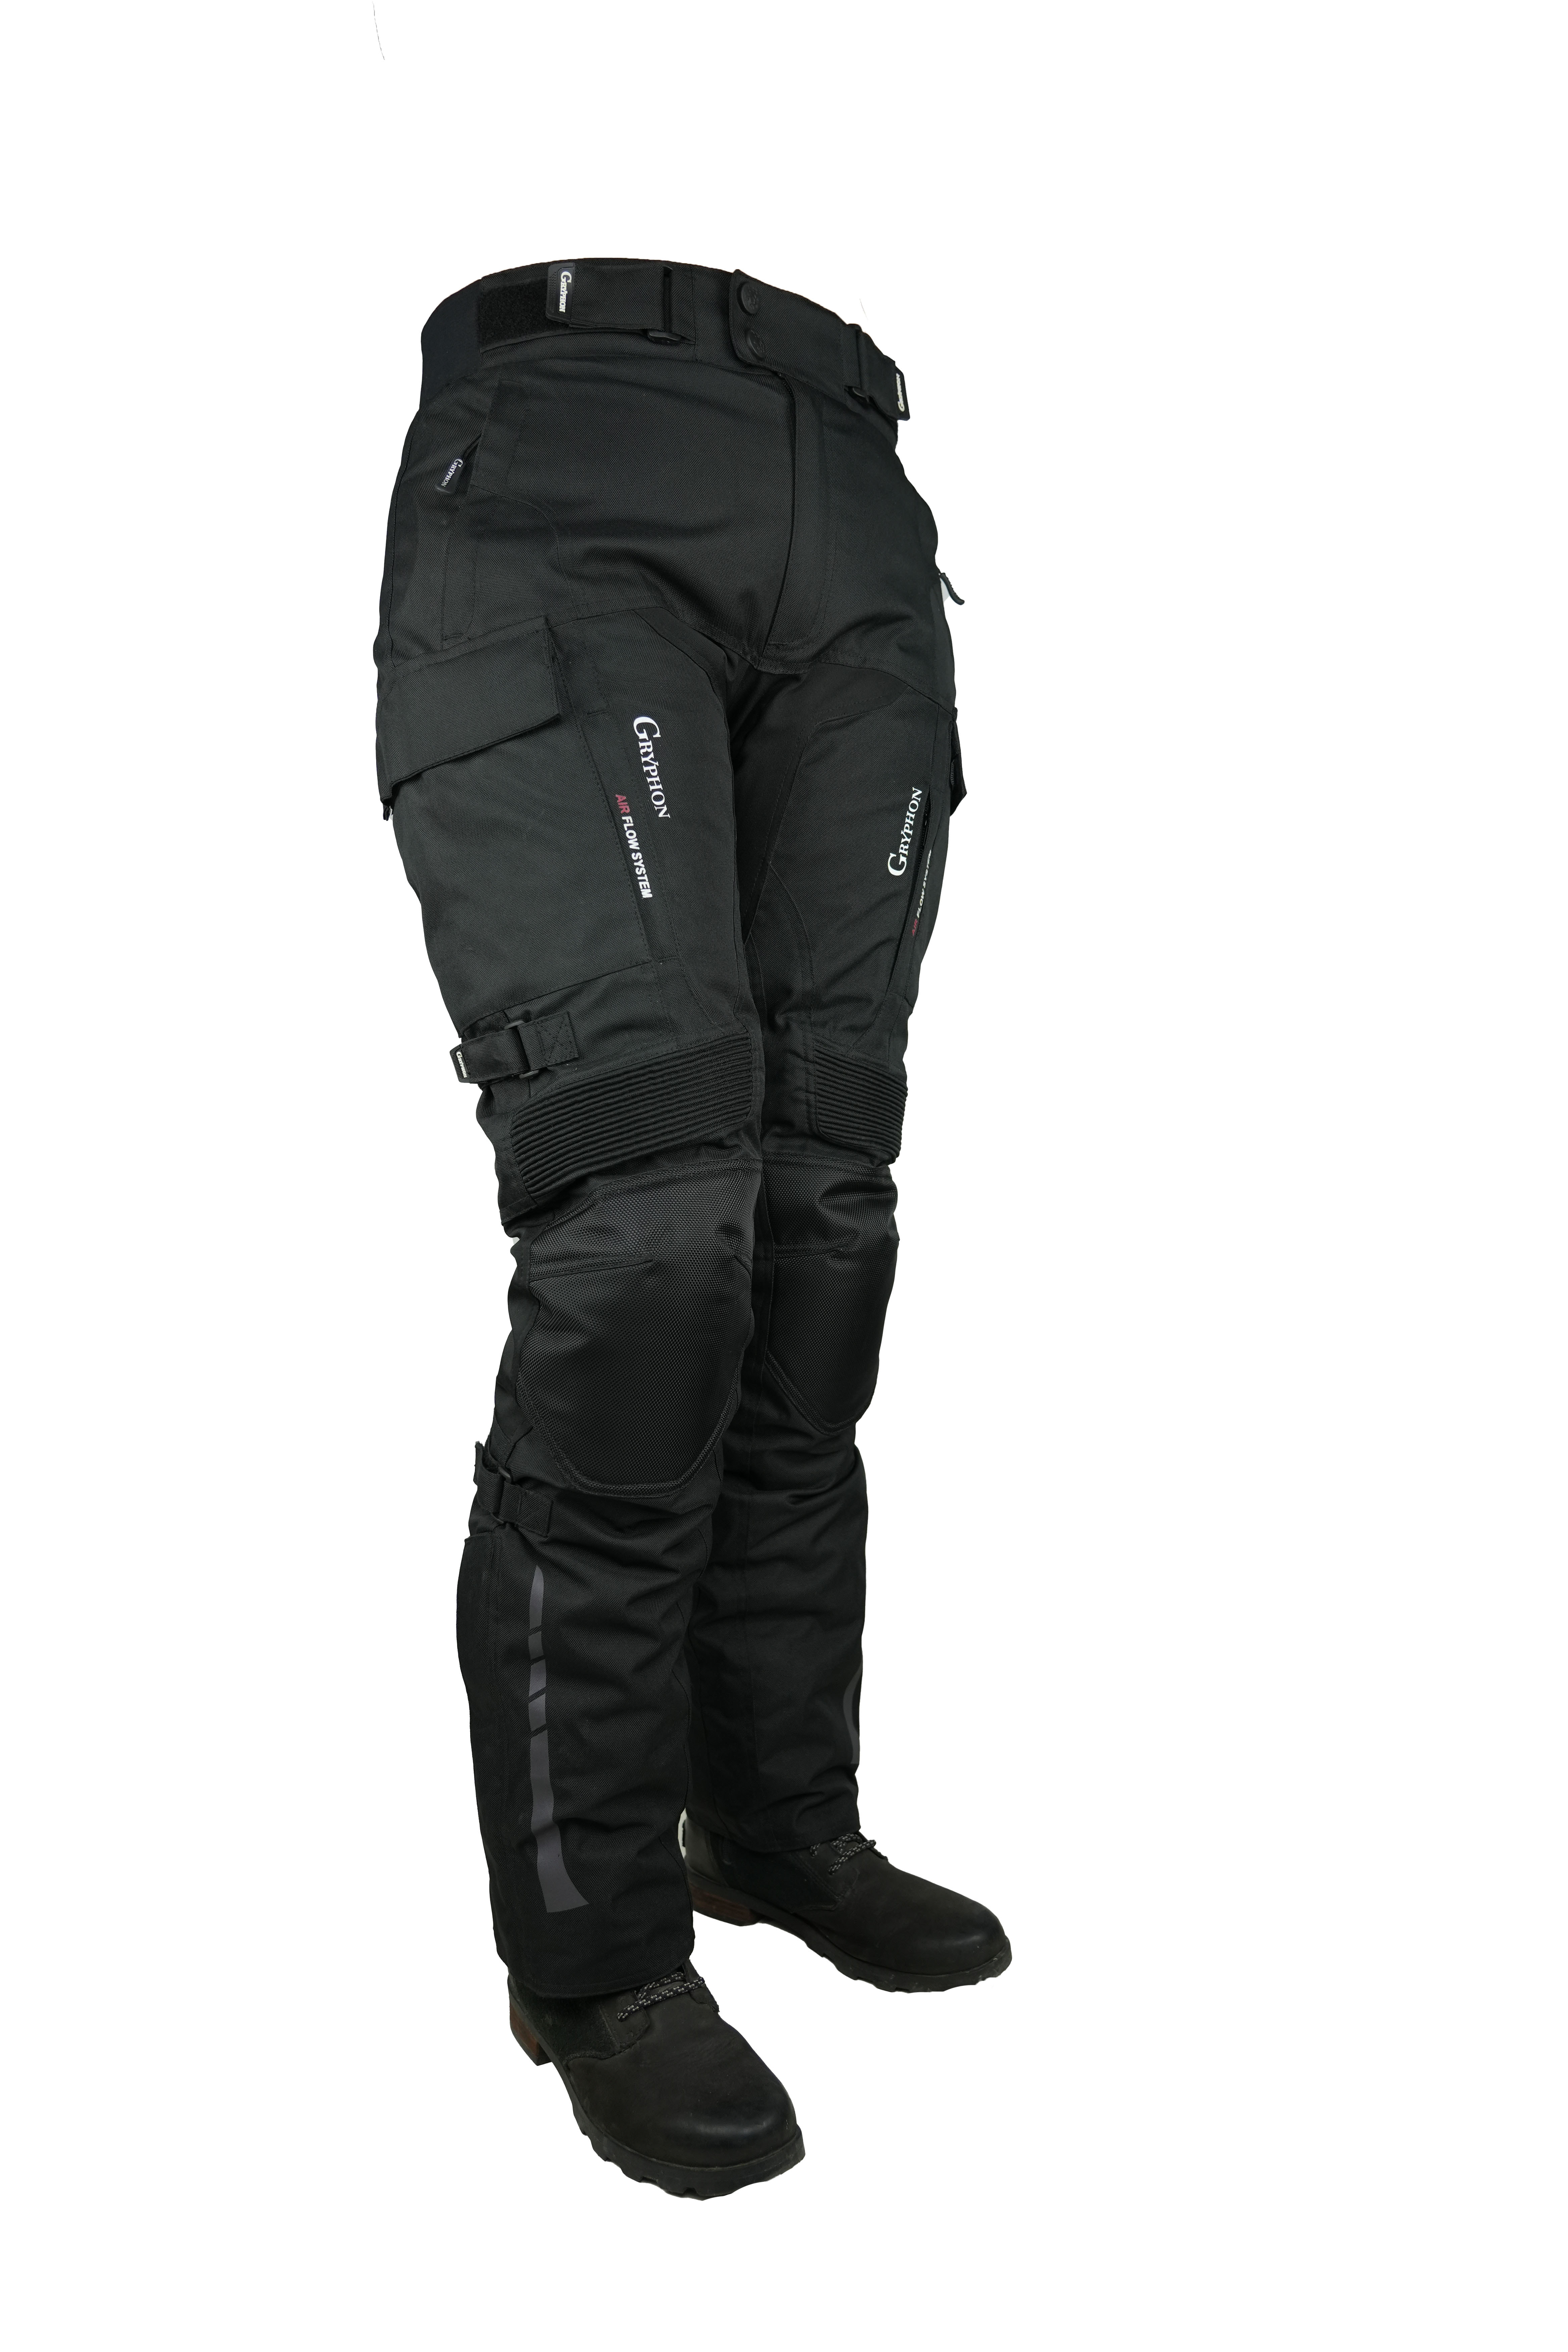 PENINSULA OFF-ROAD MOTORCYCLE PANTS | In-boot riding pants.